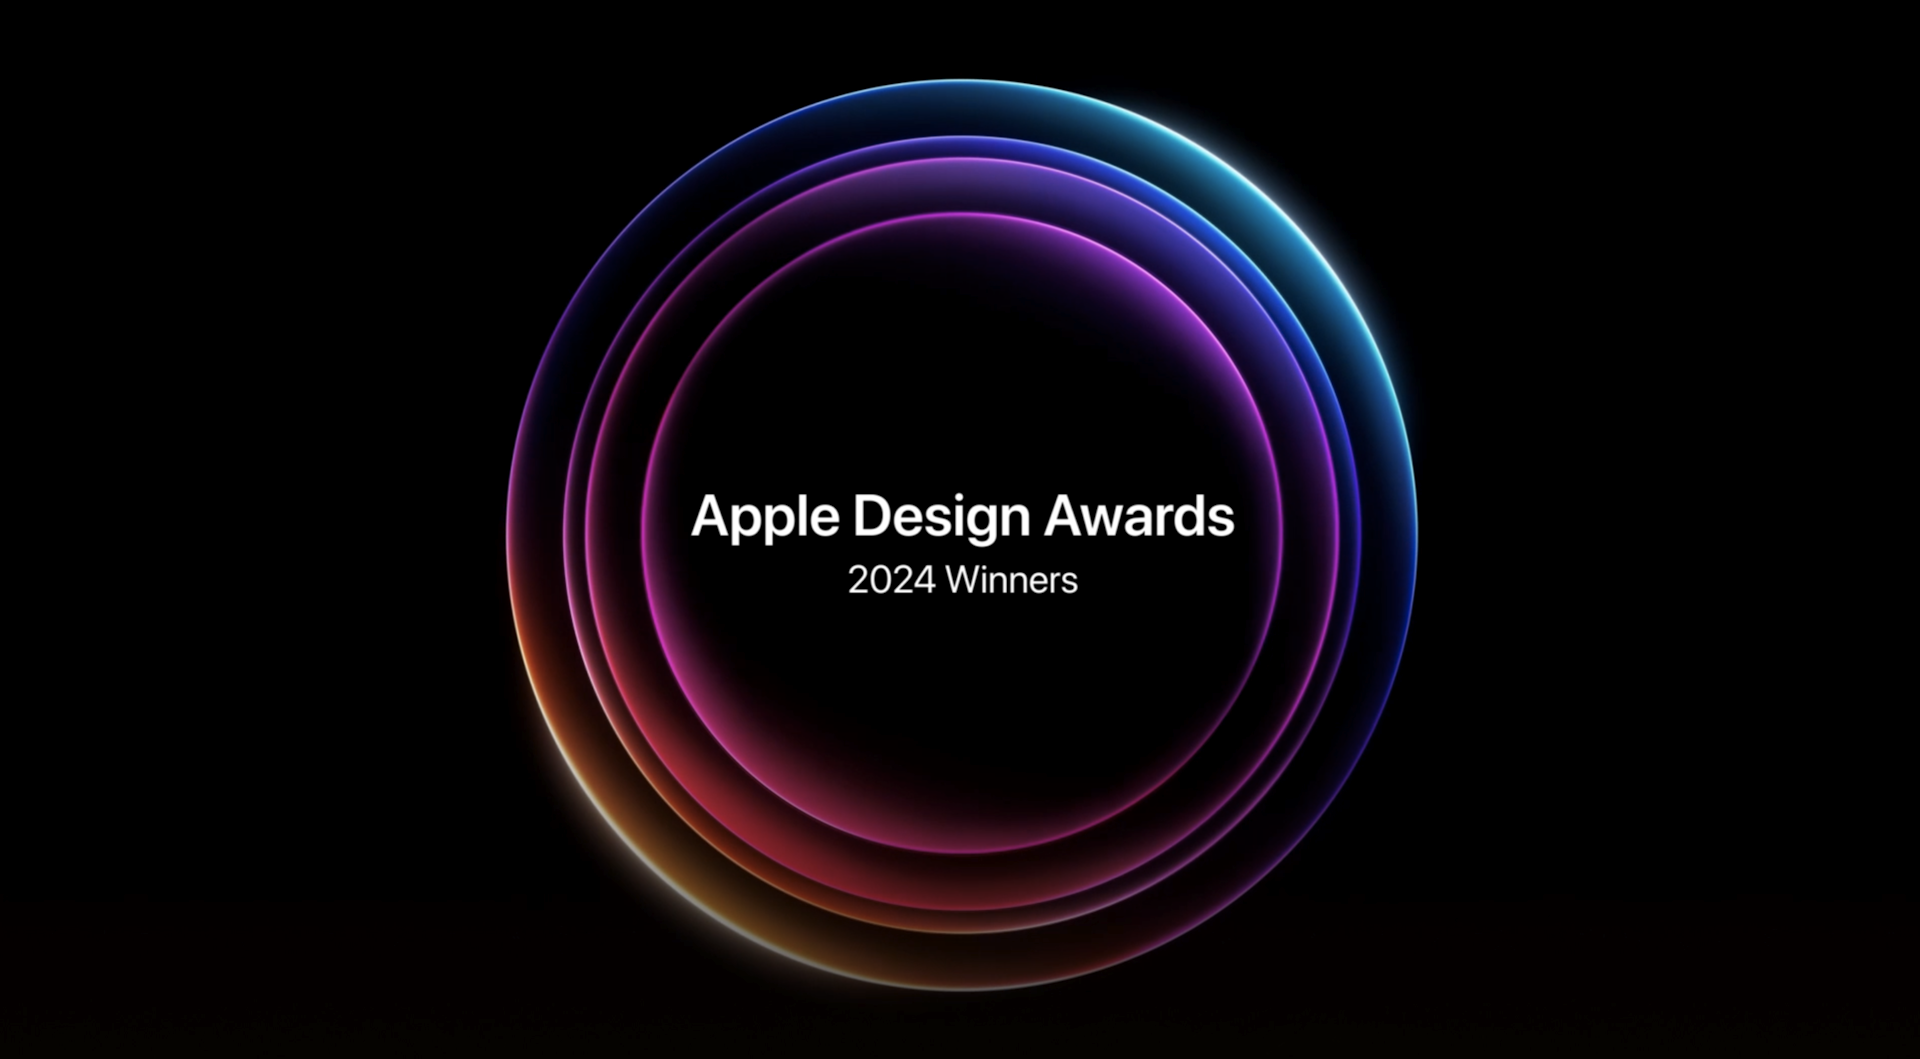 WWDC24: Apple Design Awards 2024 Winners Announced and Two Apps I Personally Missed